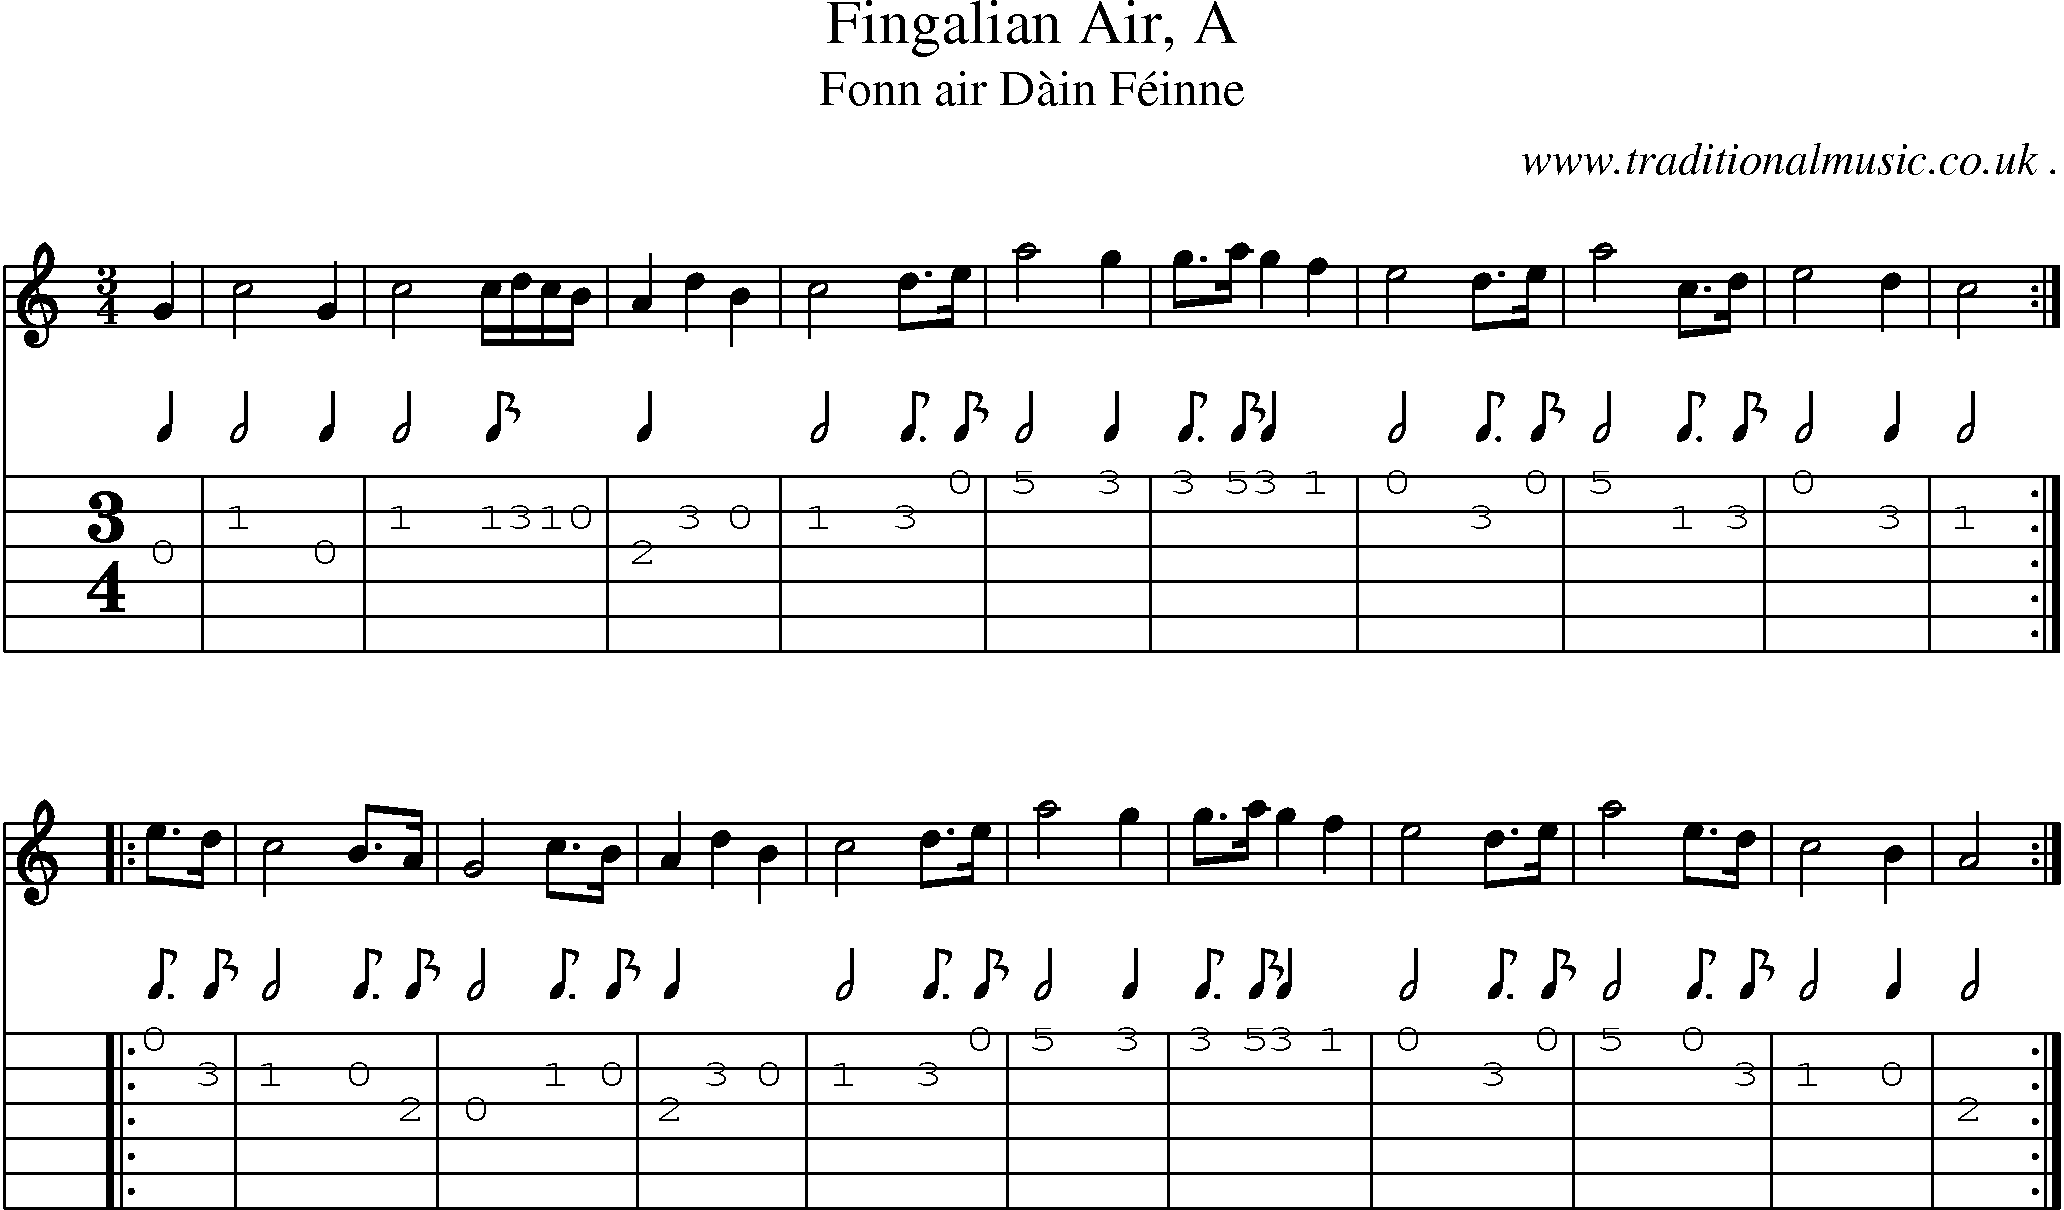 Sheet-music  score, Chords and Guitar Tabs for Fingalian Air A